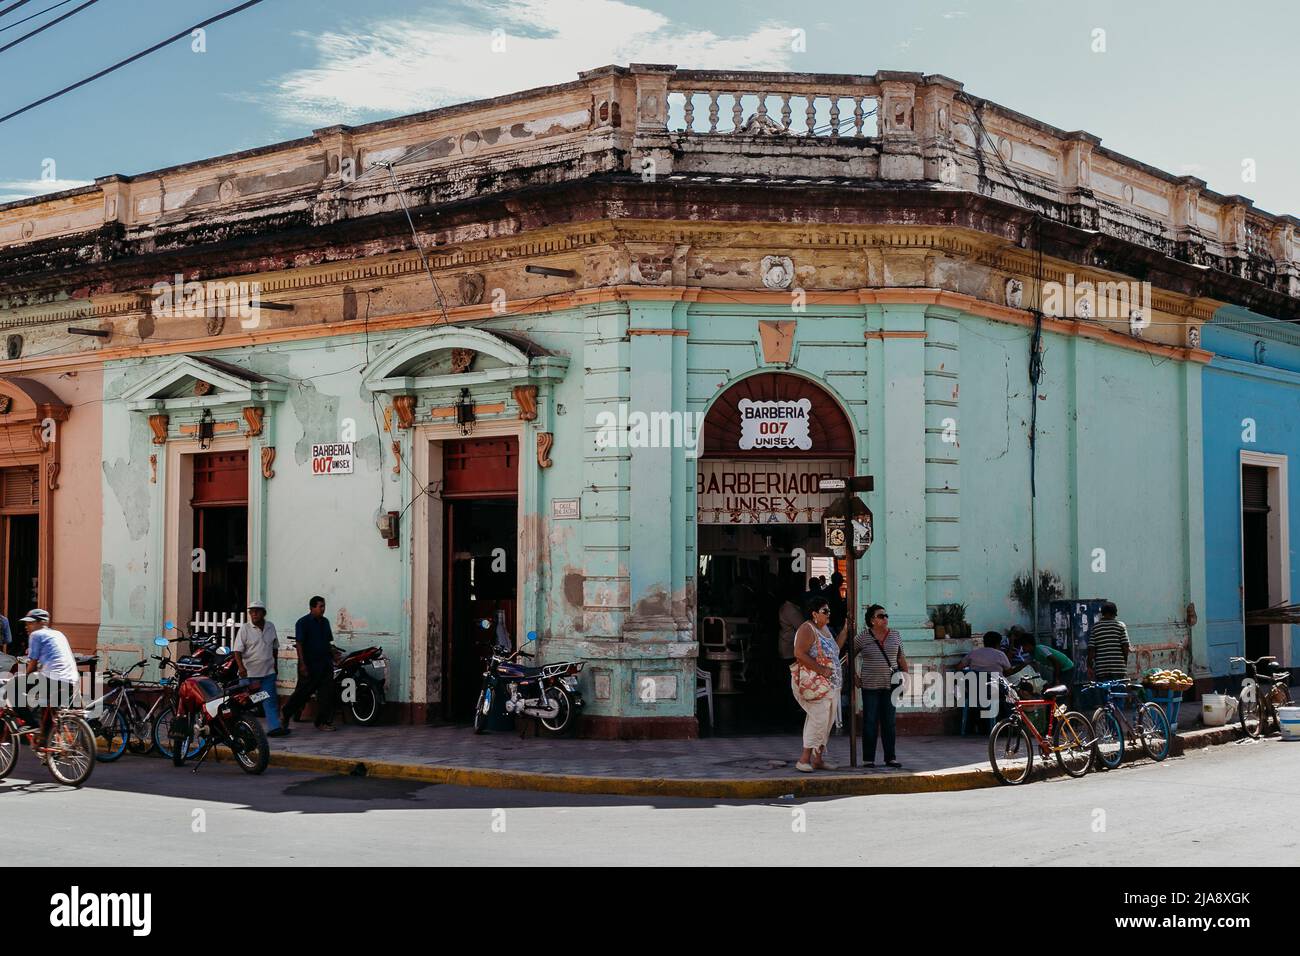 Daily life, local people in front of a corner barbershop in a Spanish colonial building in Granada, Nicaragua Stock Photo